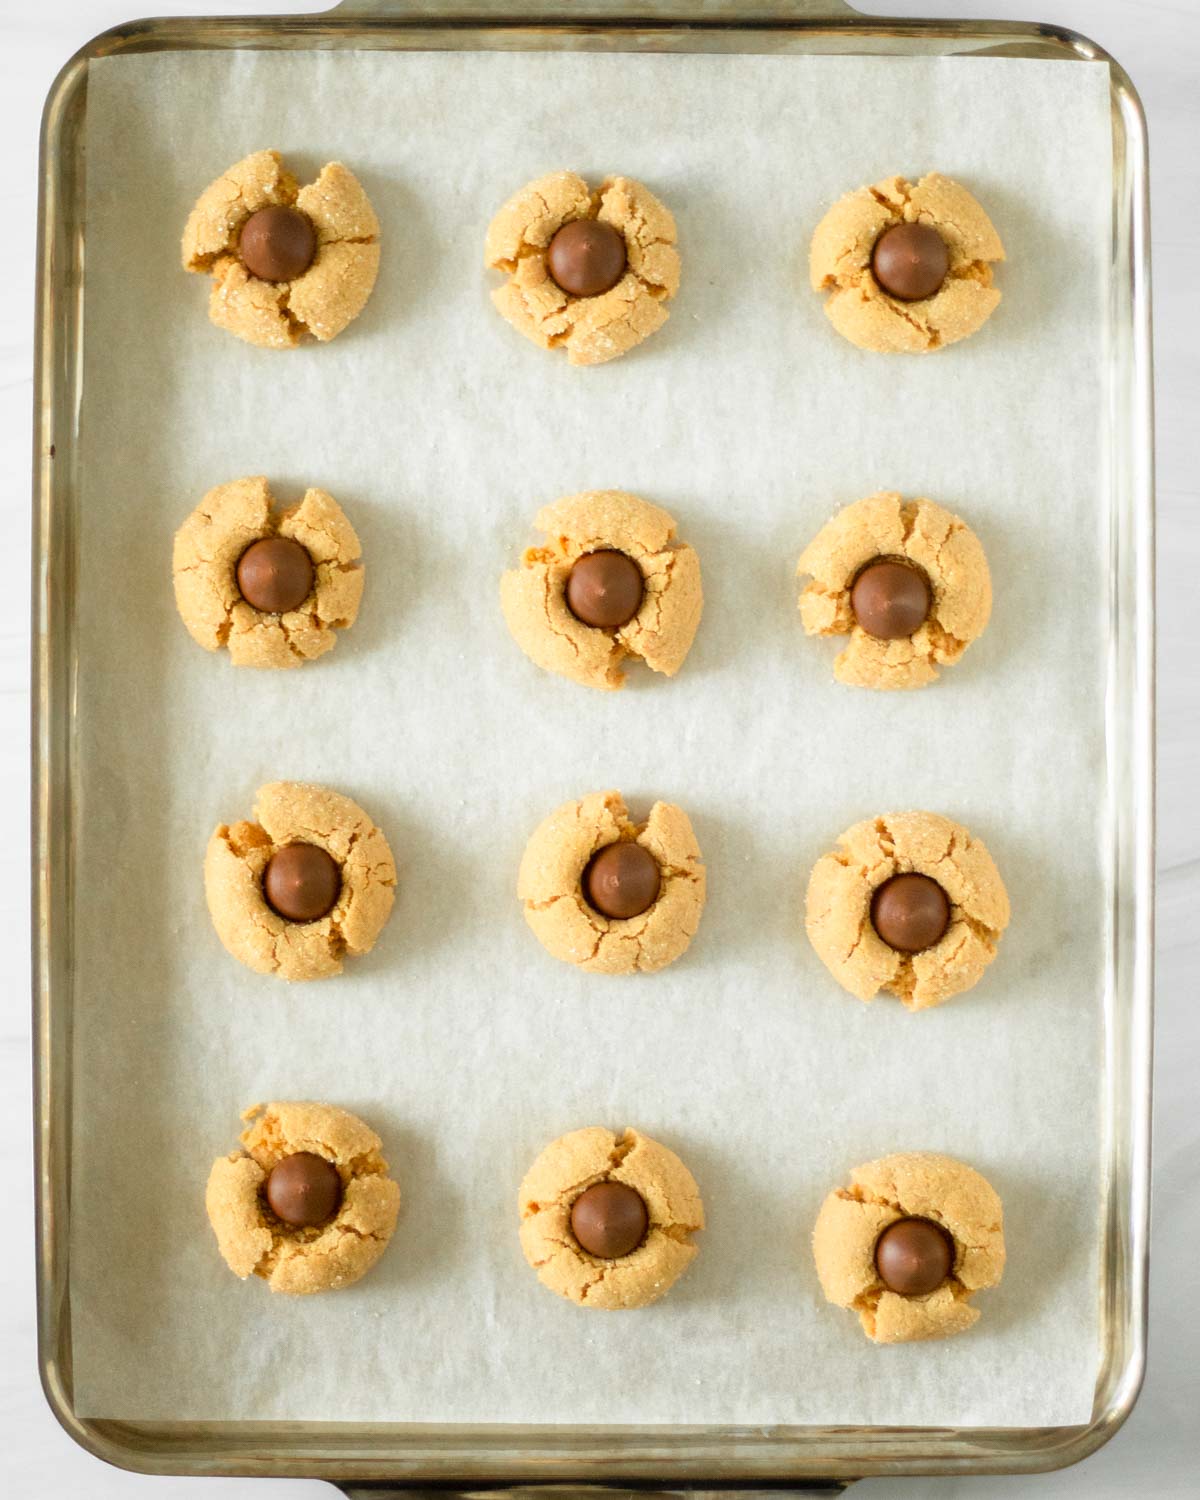 Step 4. Bake the cookies and press the kisses into each cookie